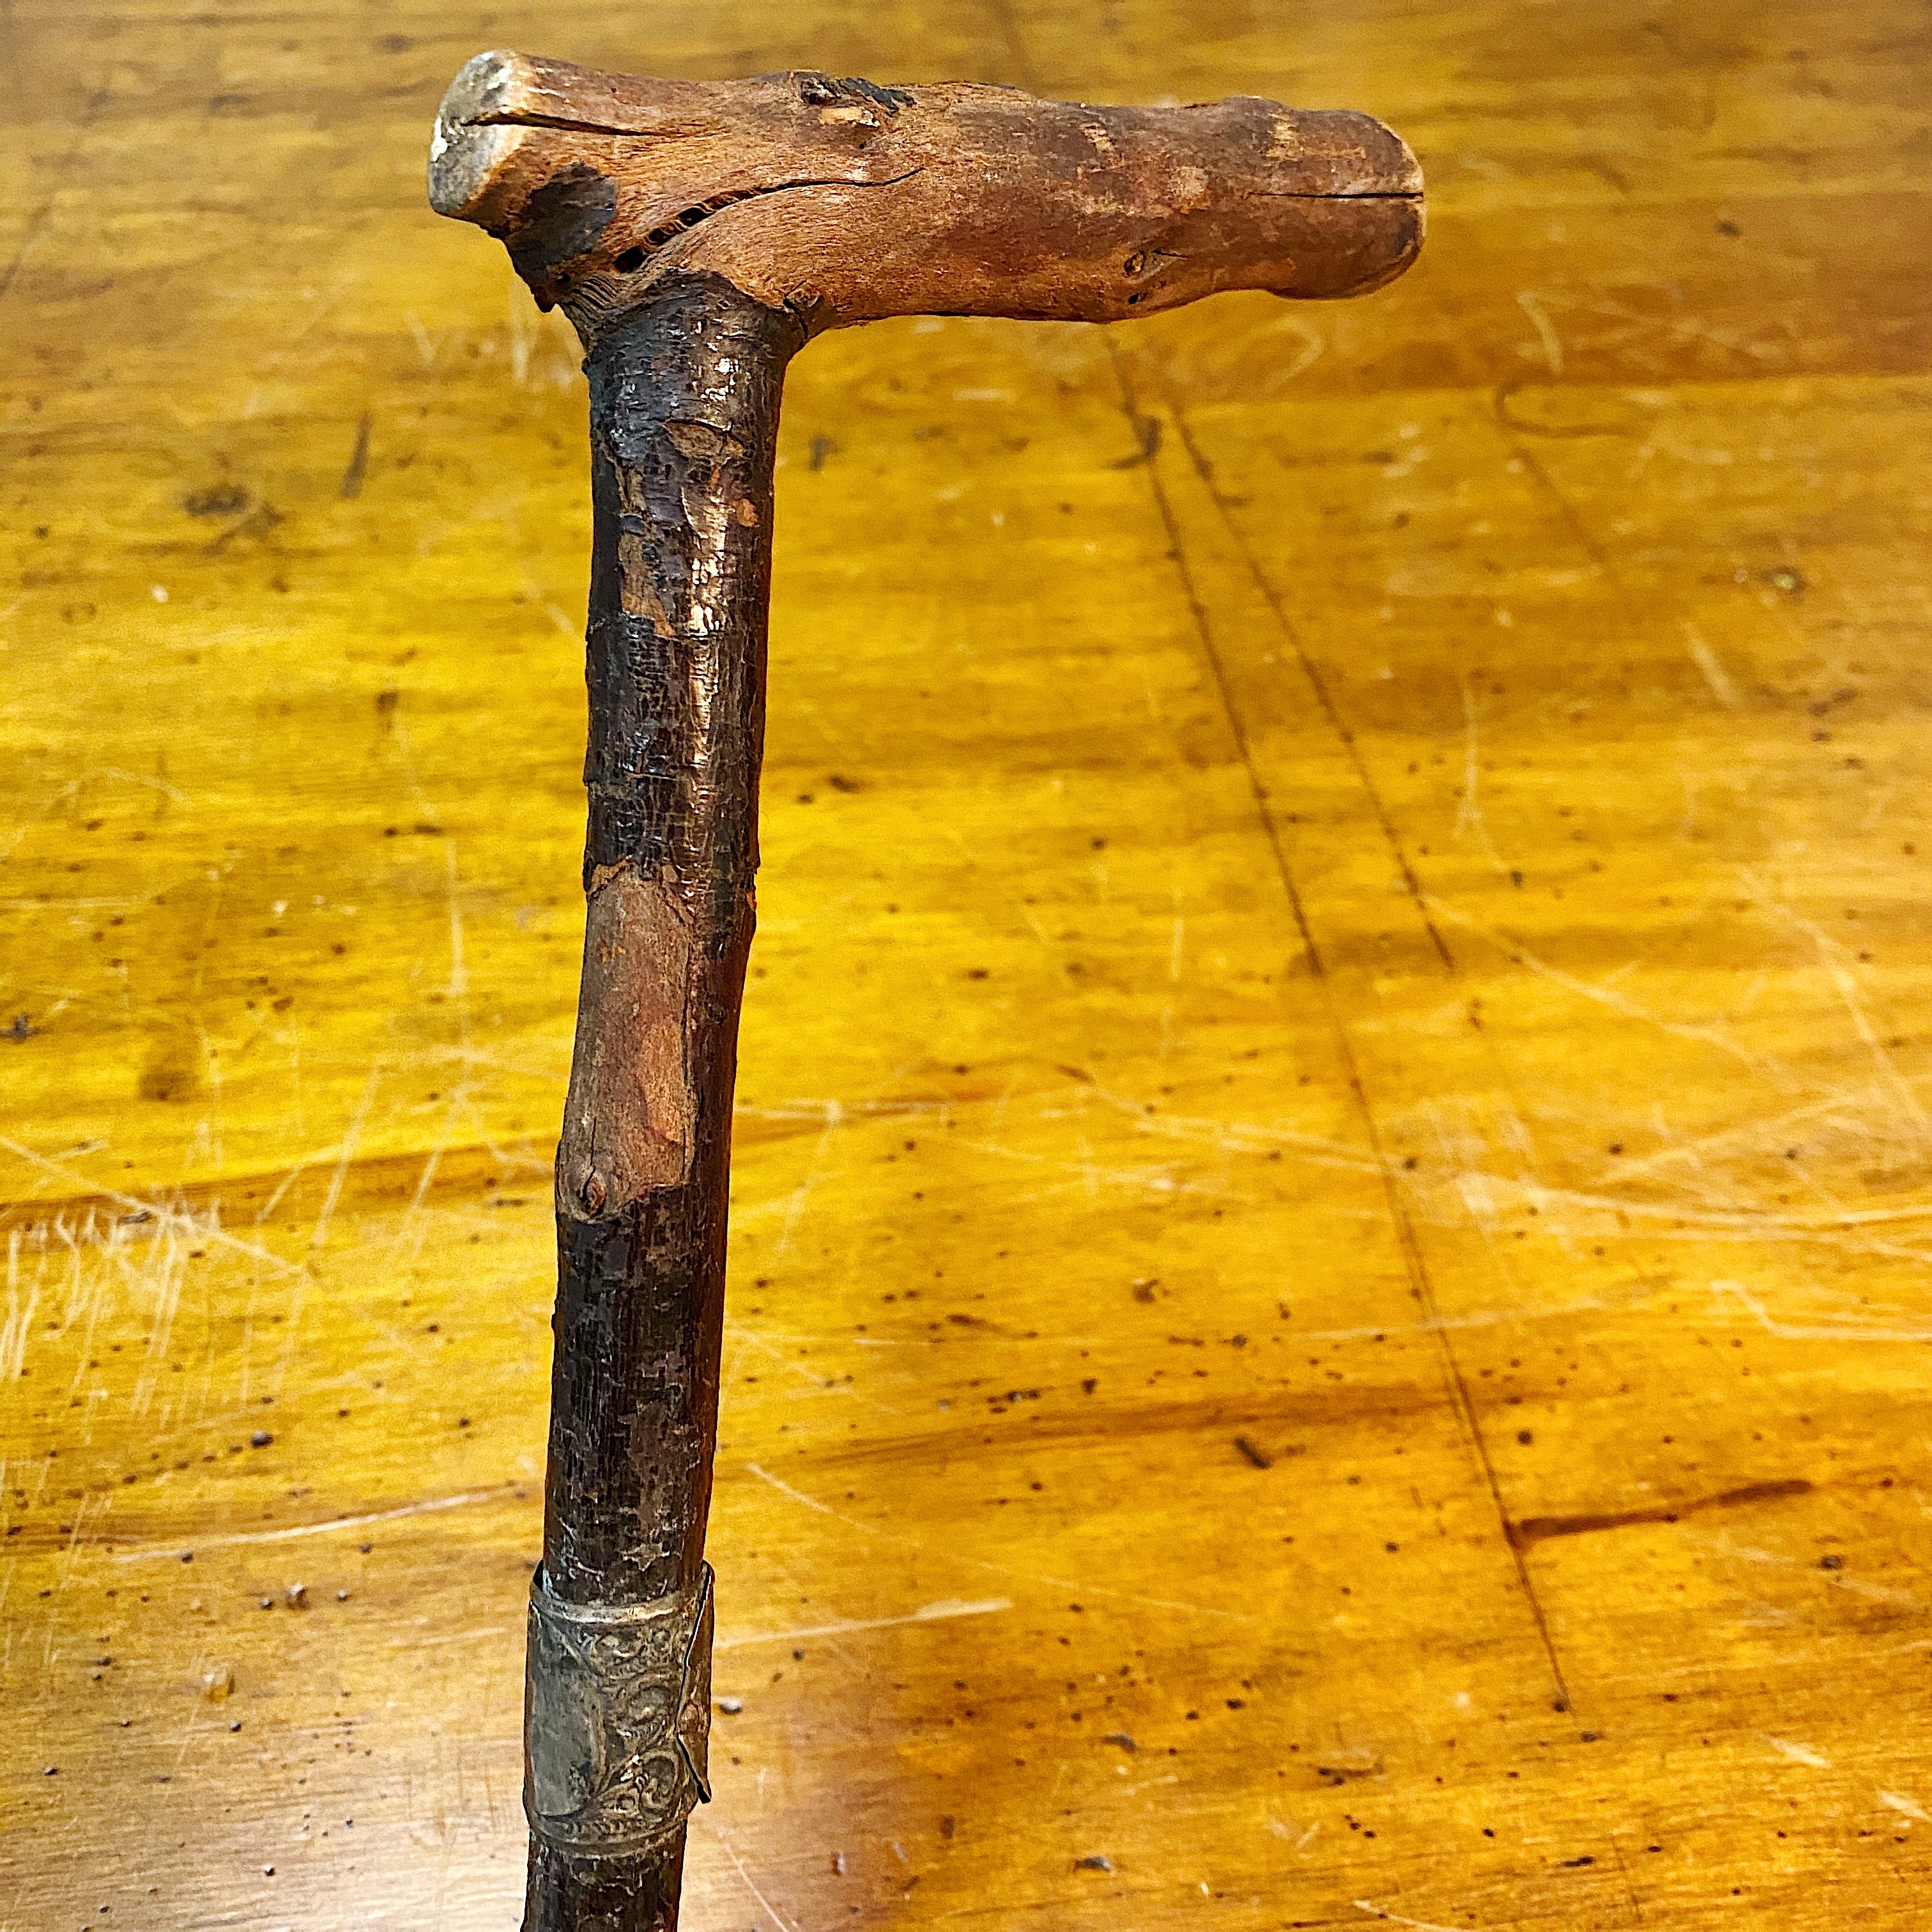 Antique Irish Blackthorn Shillelagh Walking Cane Early 1900s Mad Van Antiques 9414